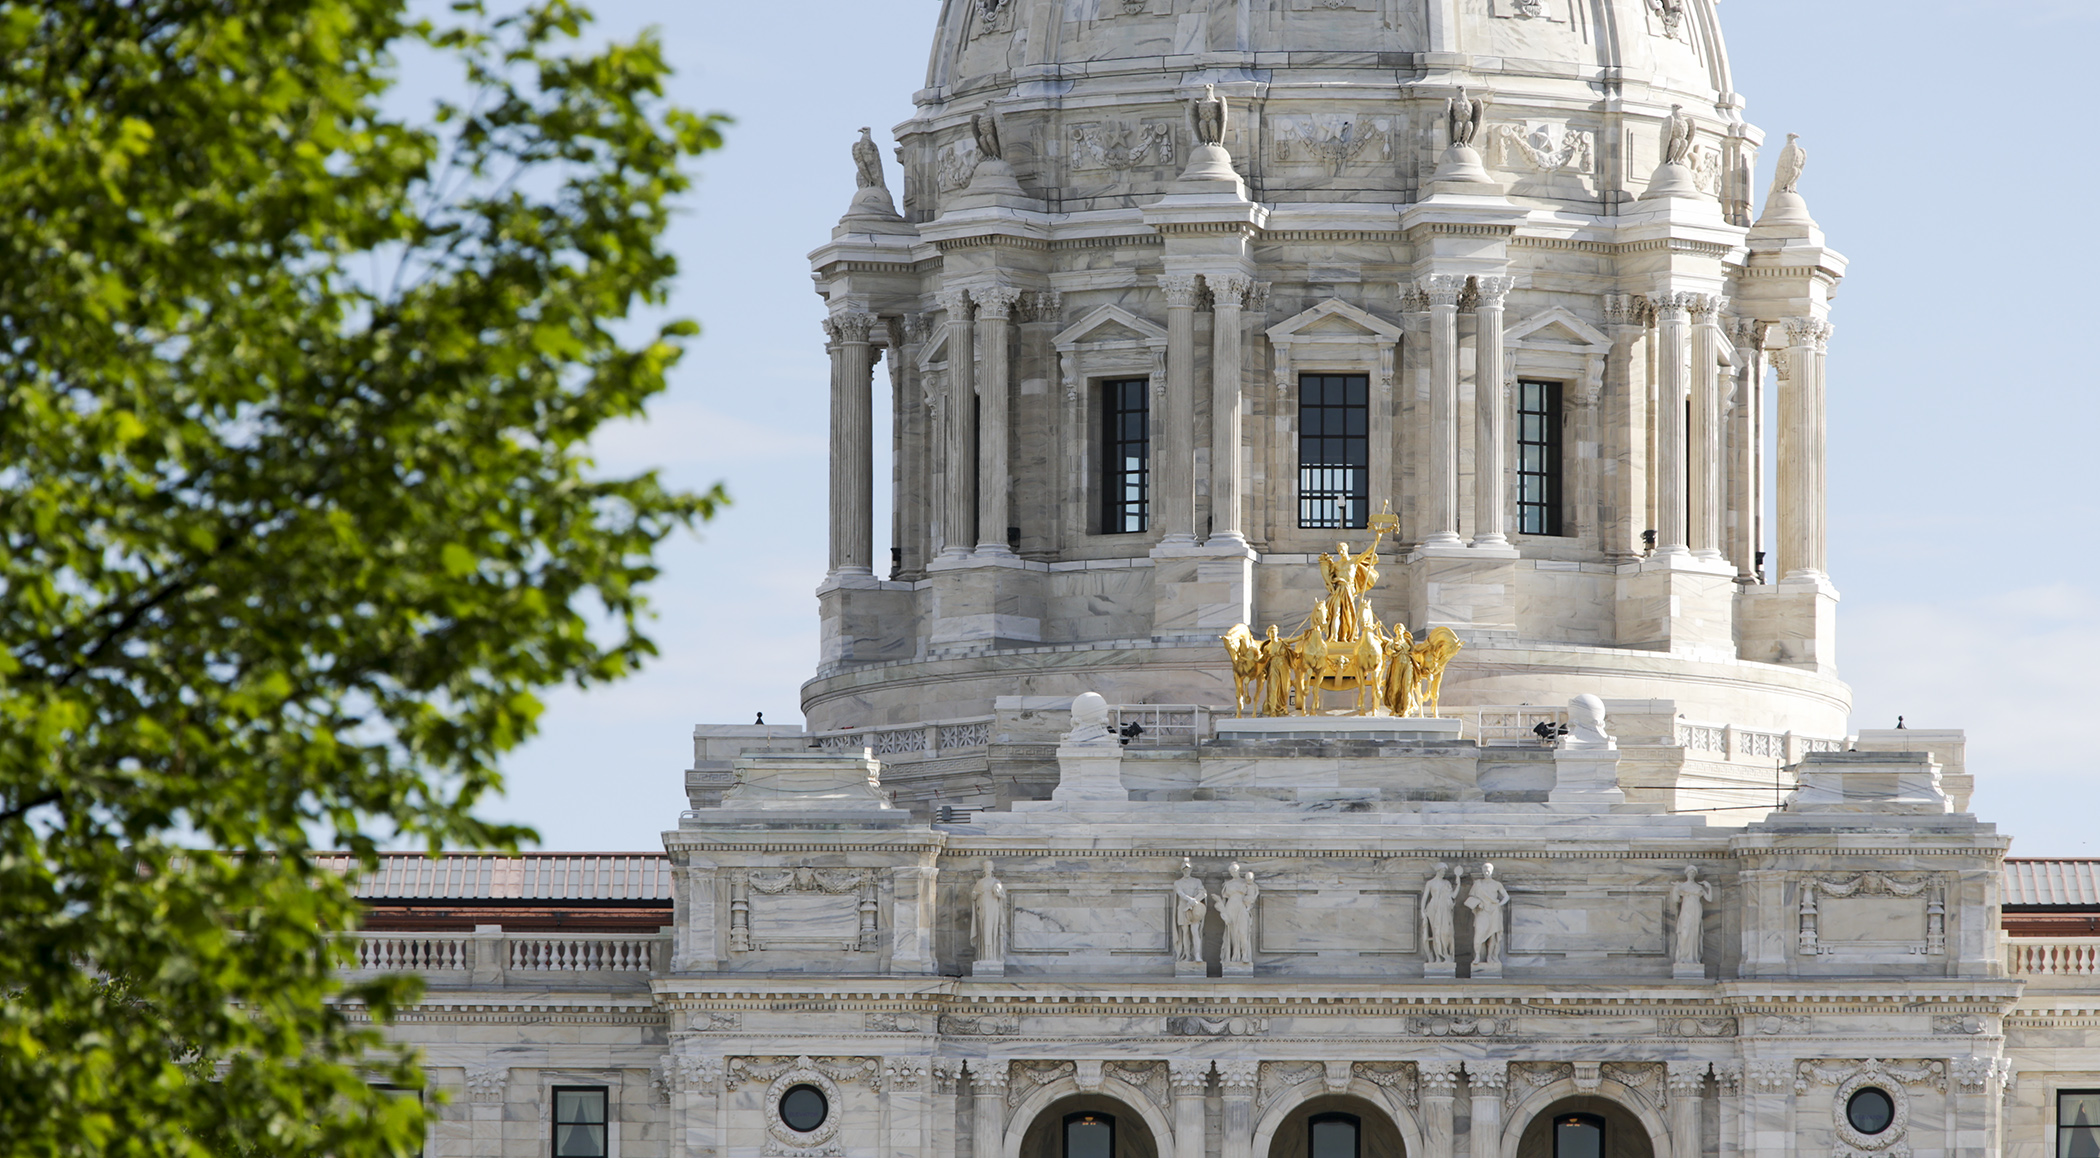 The Minnesota State Capitol pictured on June 30. Photo by Paul Battaglia